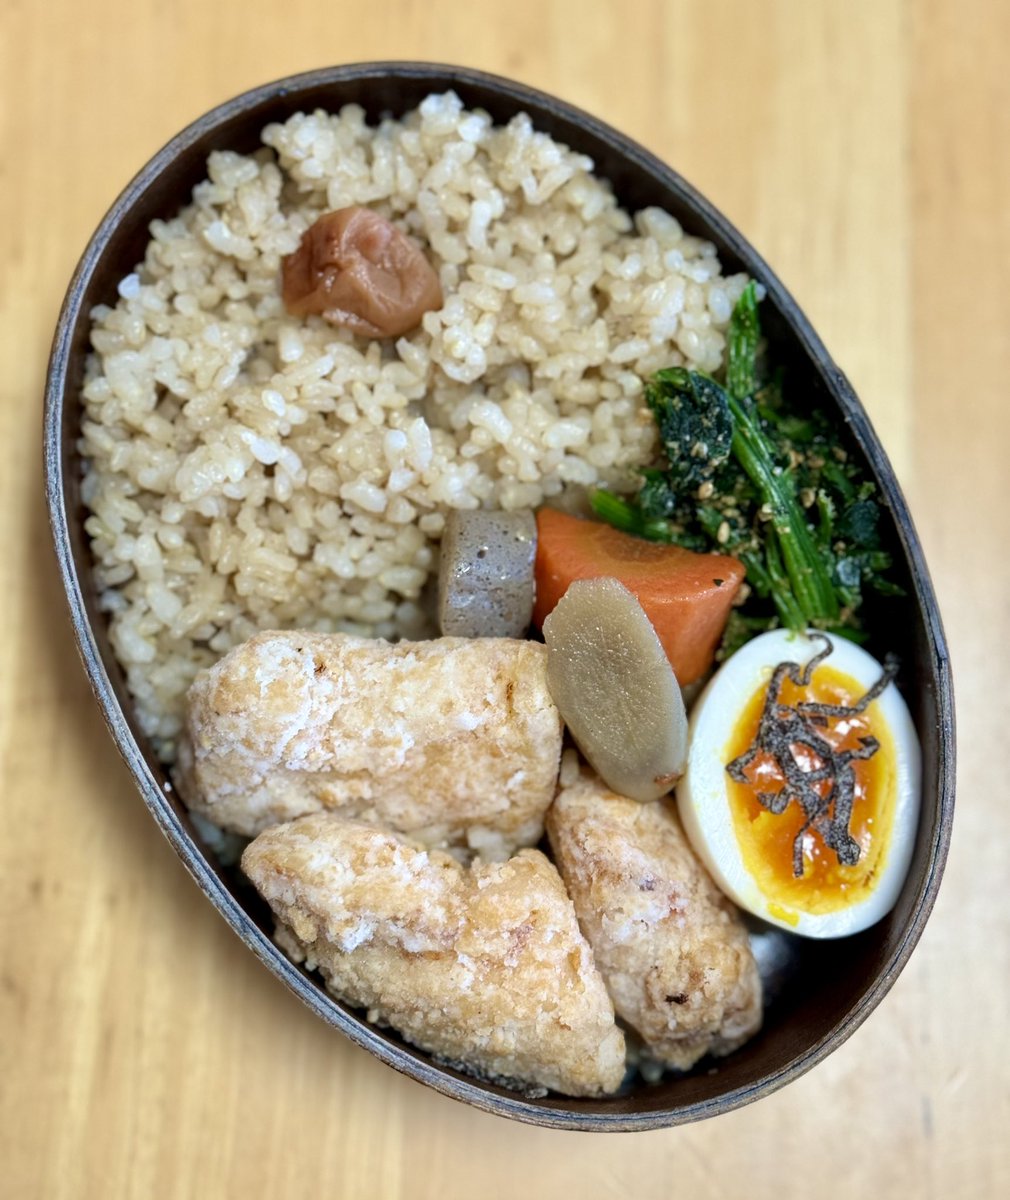 Today’s packed lunch 🍱 brown rice, karaage, simmered vegetables, spinach with sesame dressing and boiled egg #今日のお弁当 #bento #packedlunch #leftovers